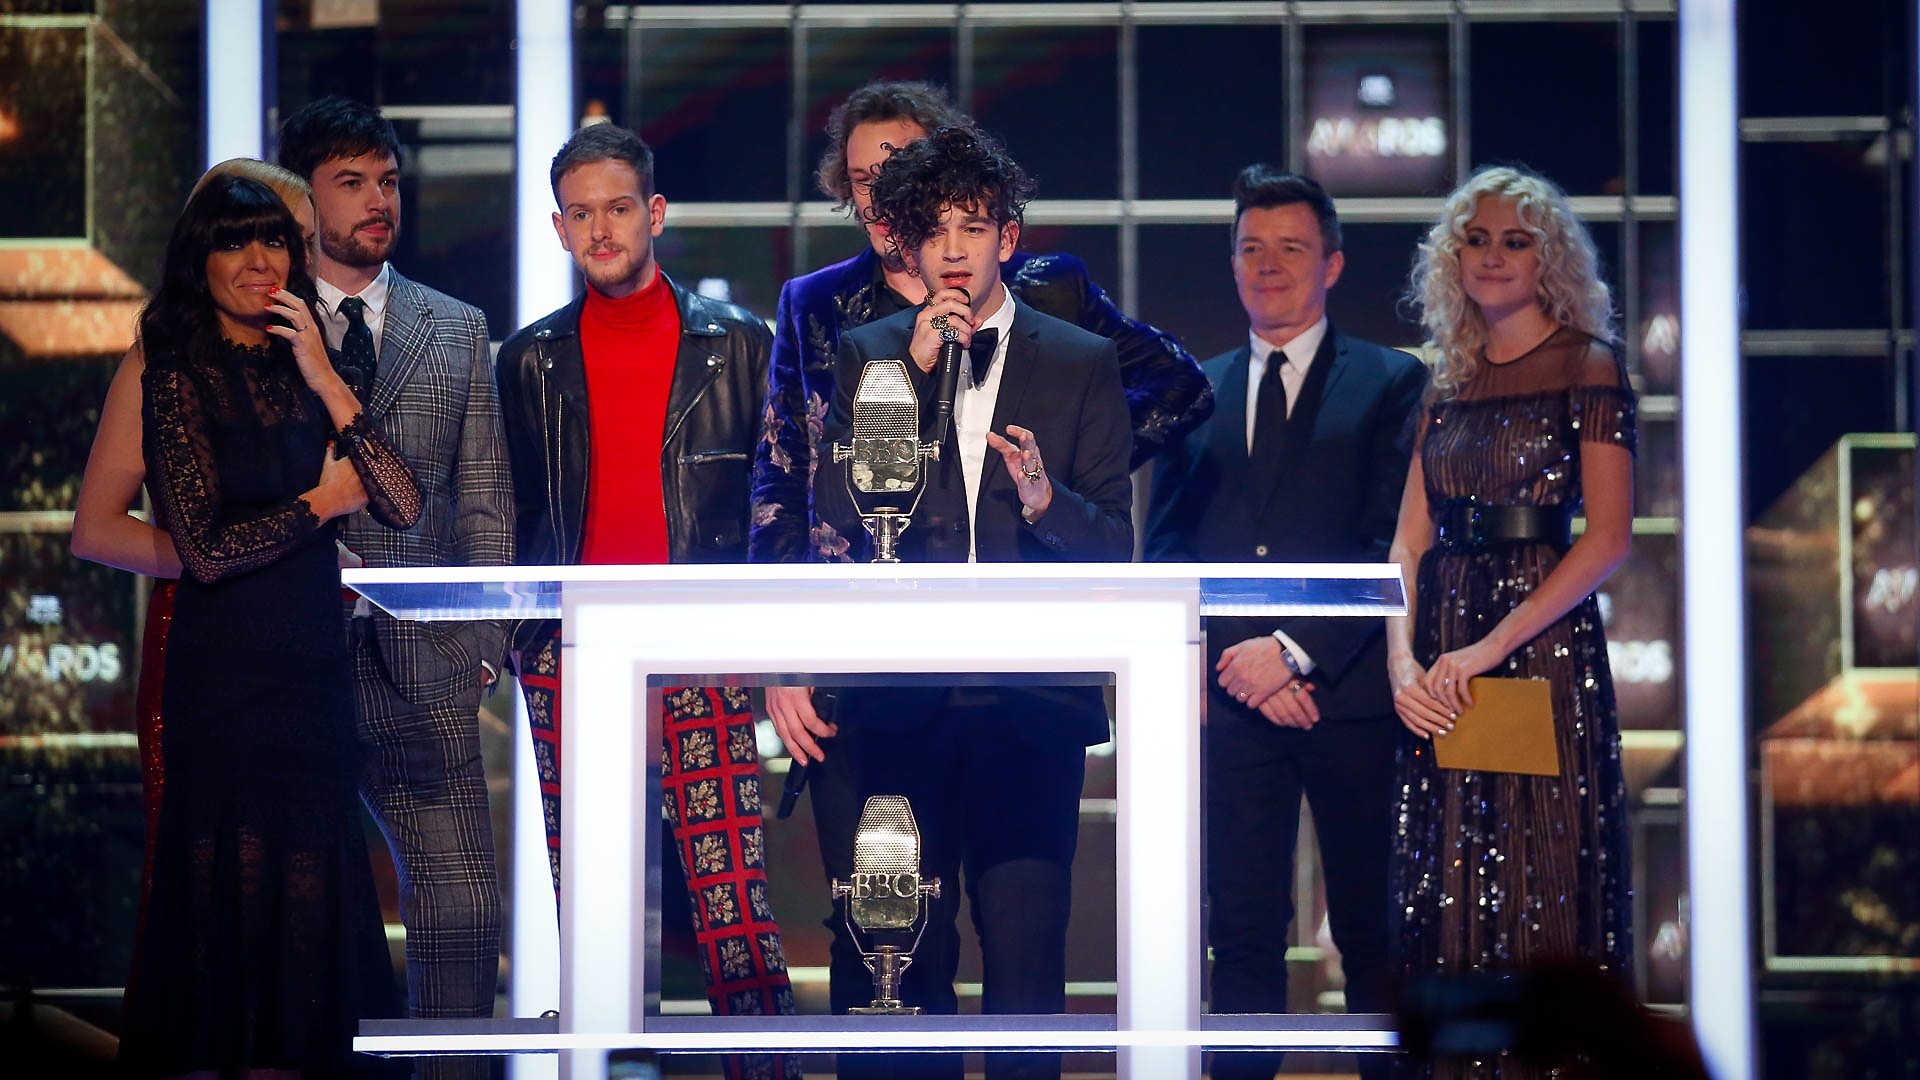 The 1975, BBC music awards, Band's rise to fame, Brightest band of 2016, 1920x1080 Full HD Desktop